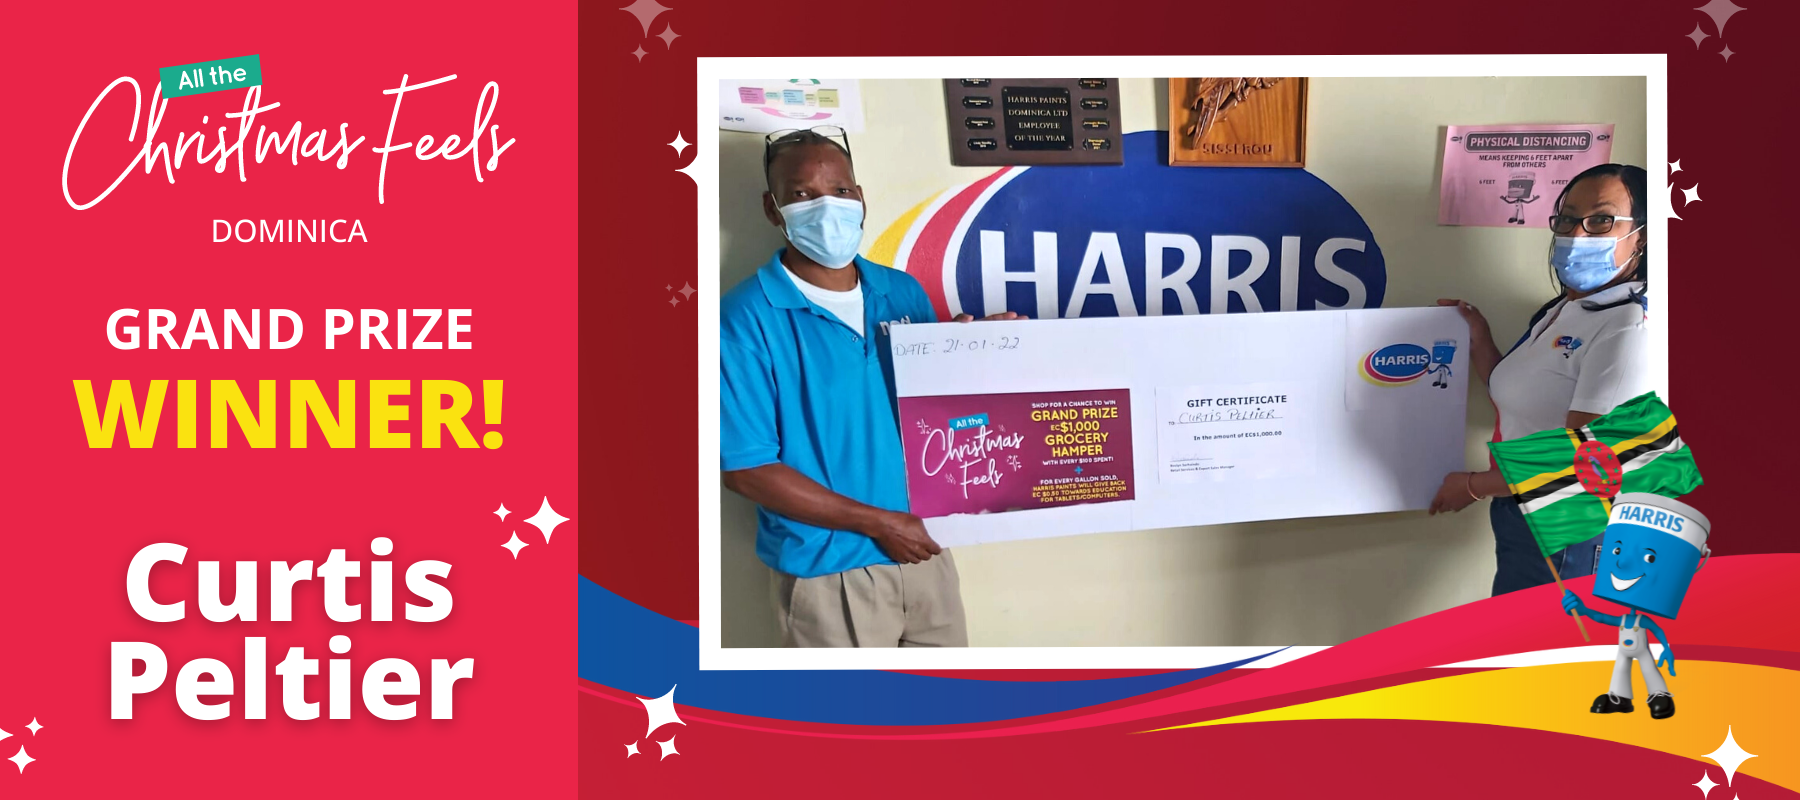 Harris Paints All the Christmas Feels promotion. Congratulate Curtis Peltier for winning the Grand Prize!